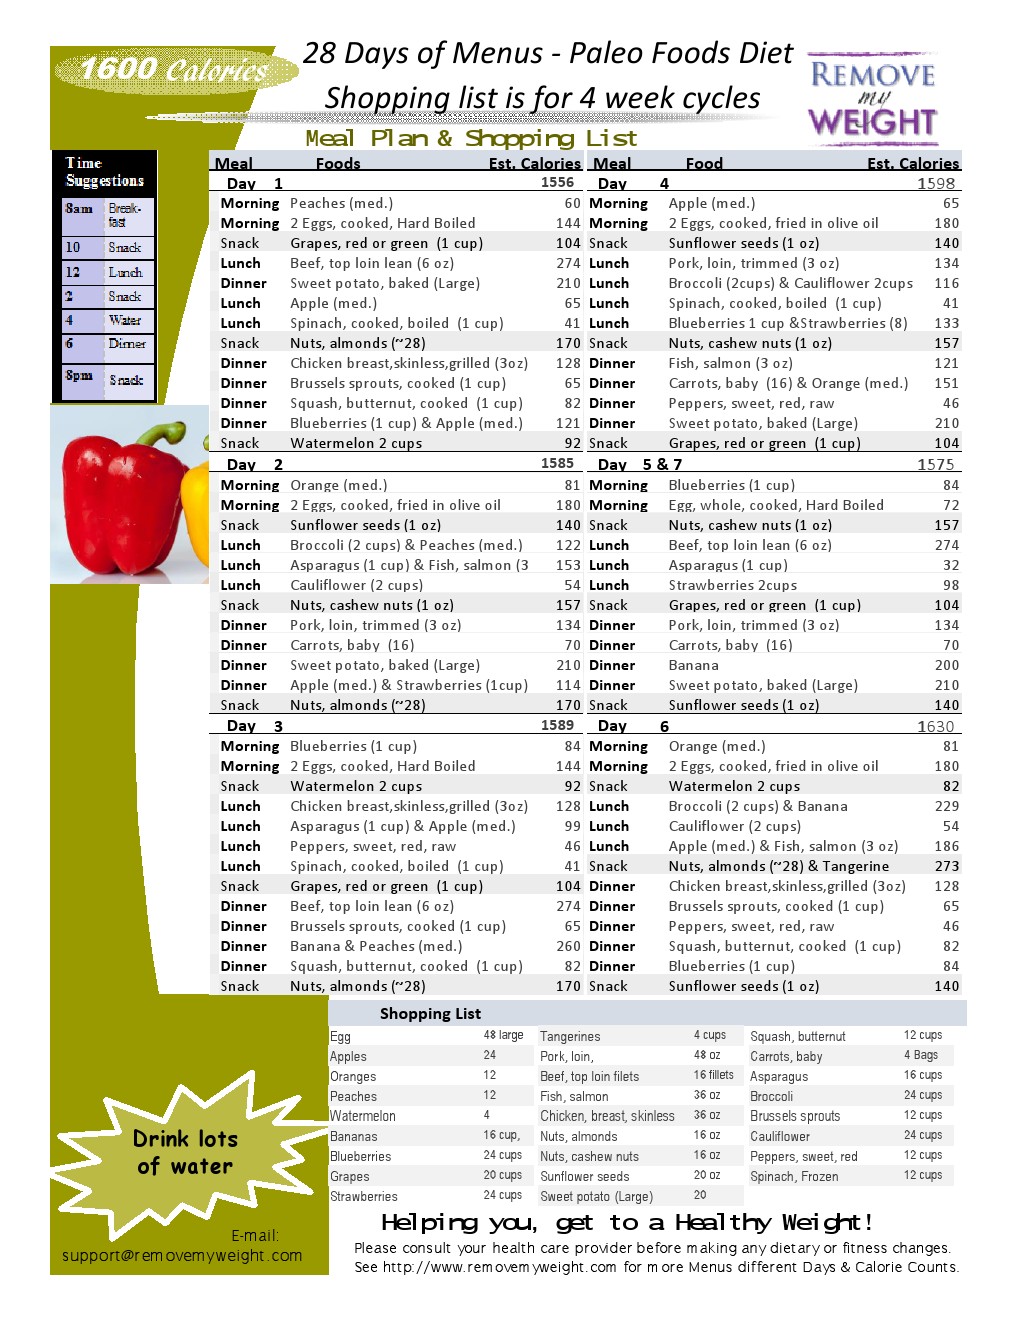 paleo-diet-30-day-1600-calories-a-day-meal-plan-to-lose-weight-menu